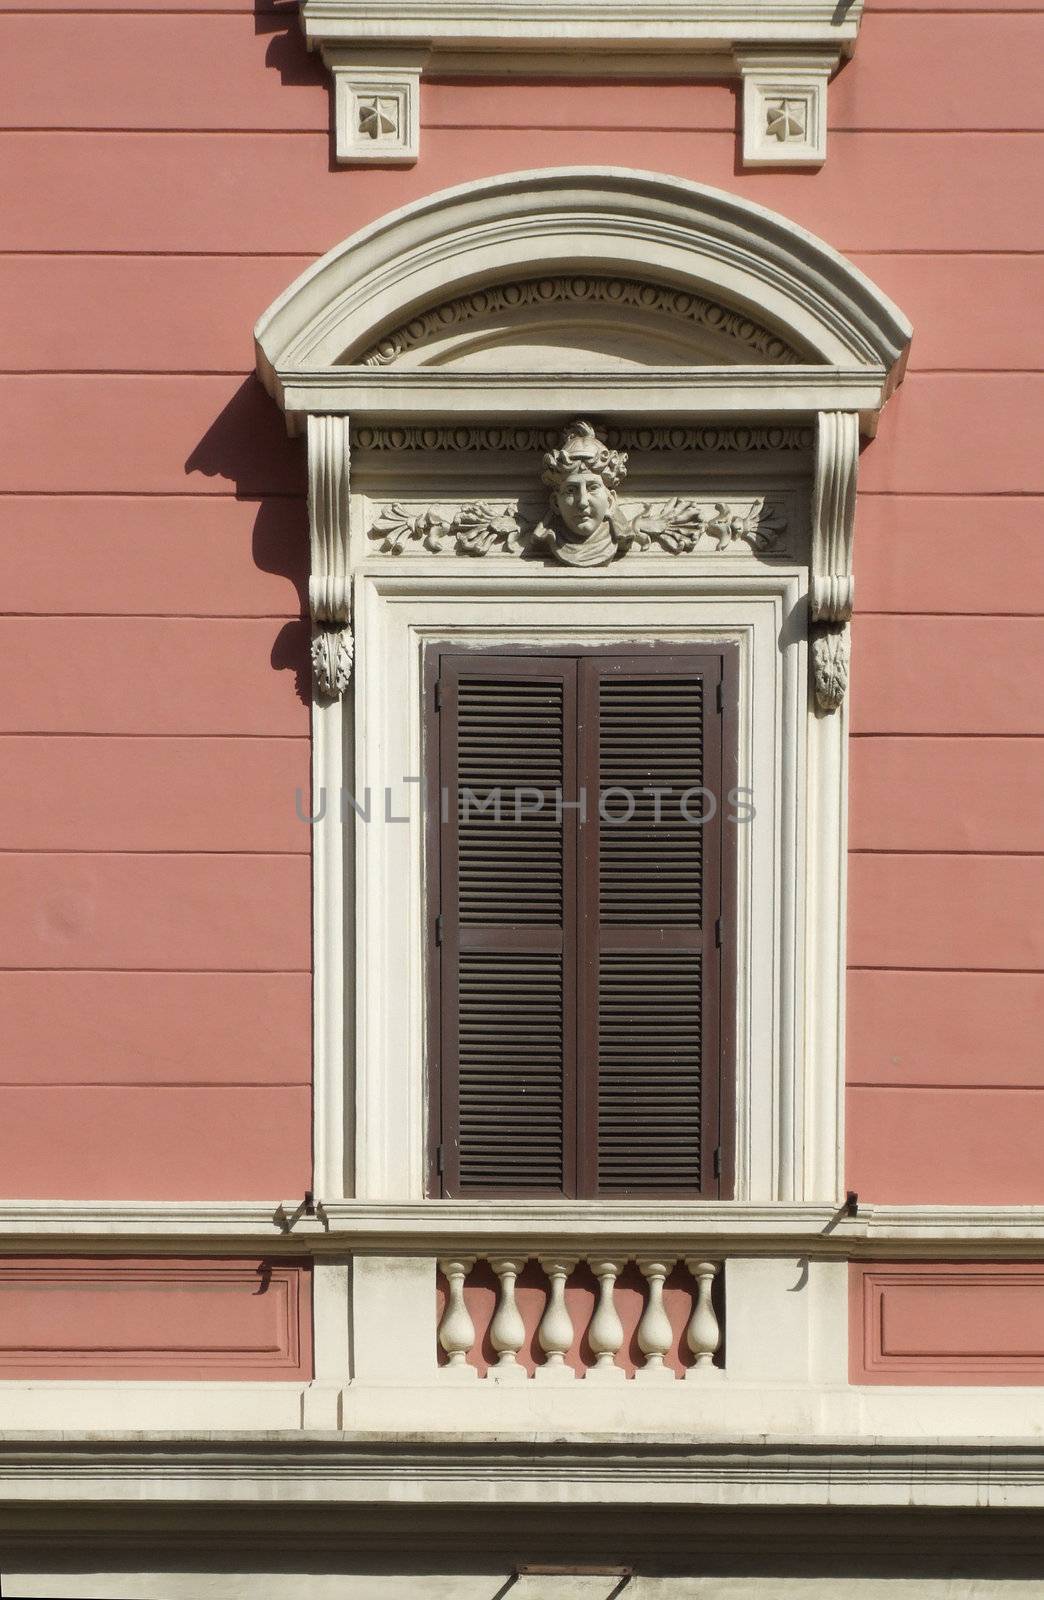 Old decorated window with shutters - Rome architecture.